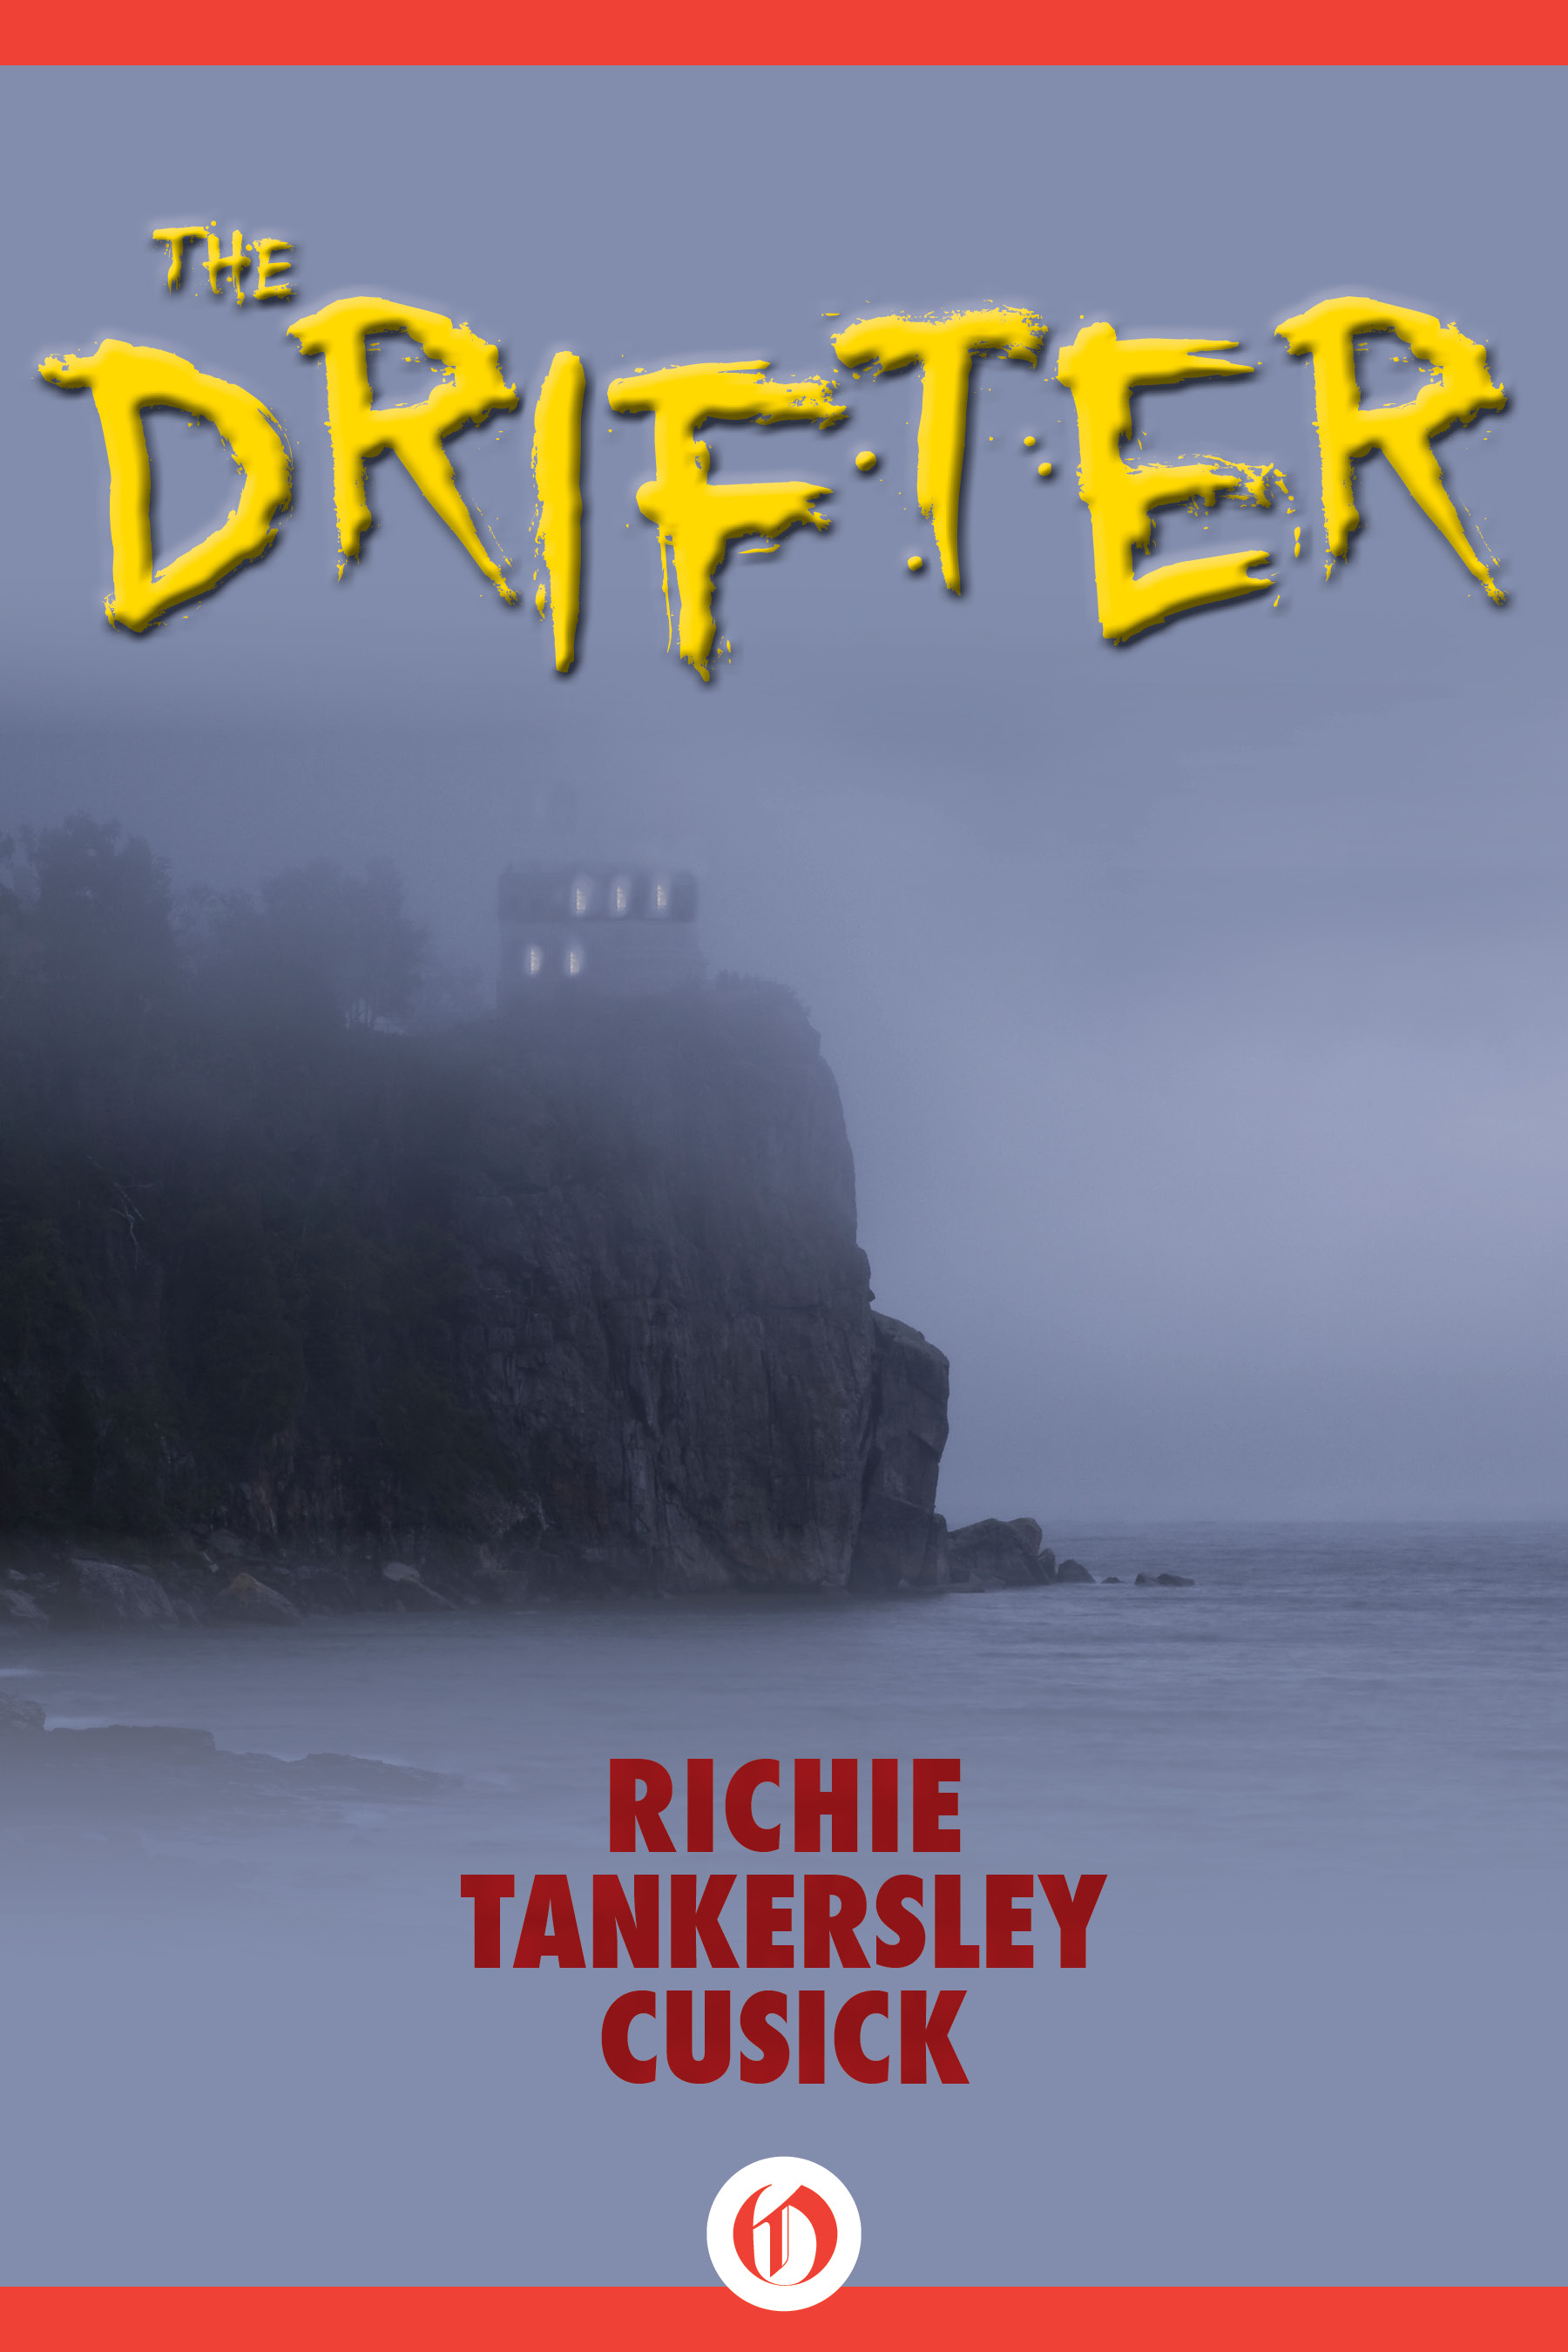 The Drifter by Richie Tankersley Cusick